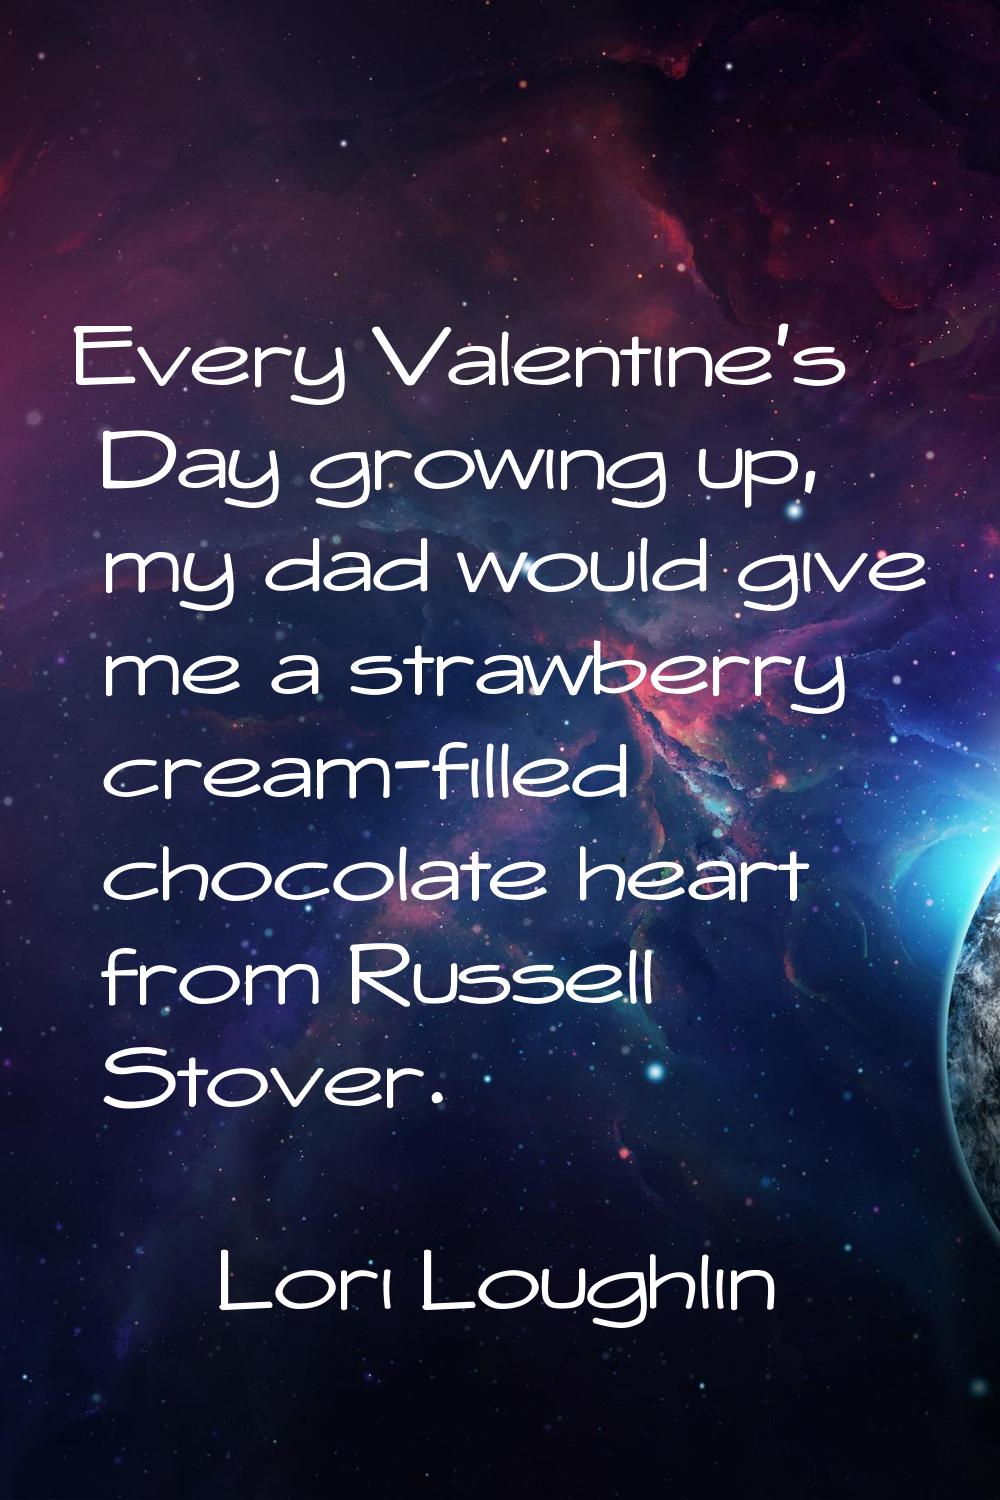 Every Valentine's Day growing up, my dad would give me a strawberry cream-filled chocolate heart fr